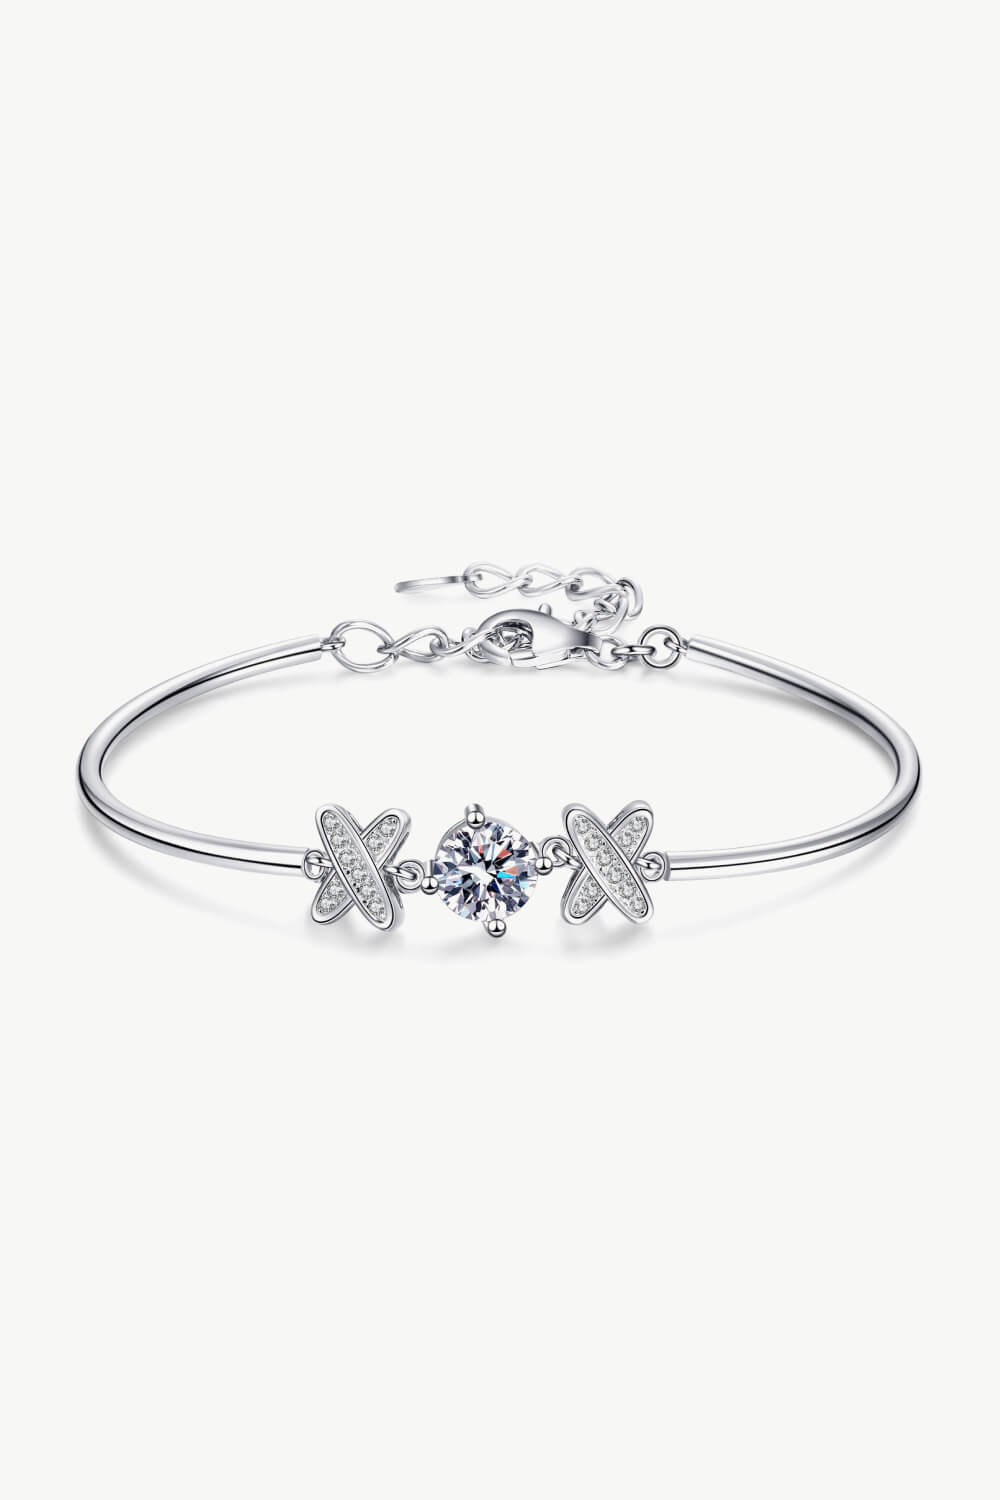 1 Carat 9" Moissanite Sterling Silver Bracelet with Zircon Accent Stones - Ti Amo I love you